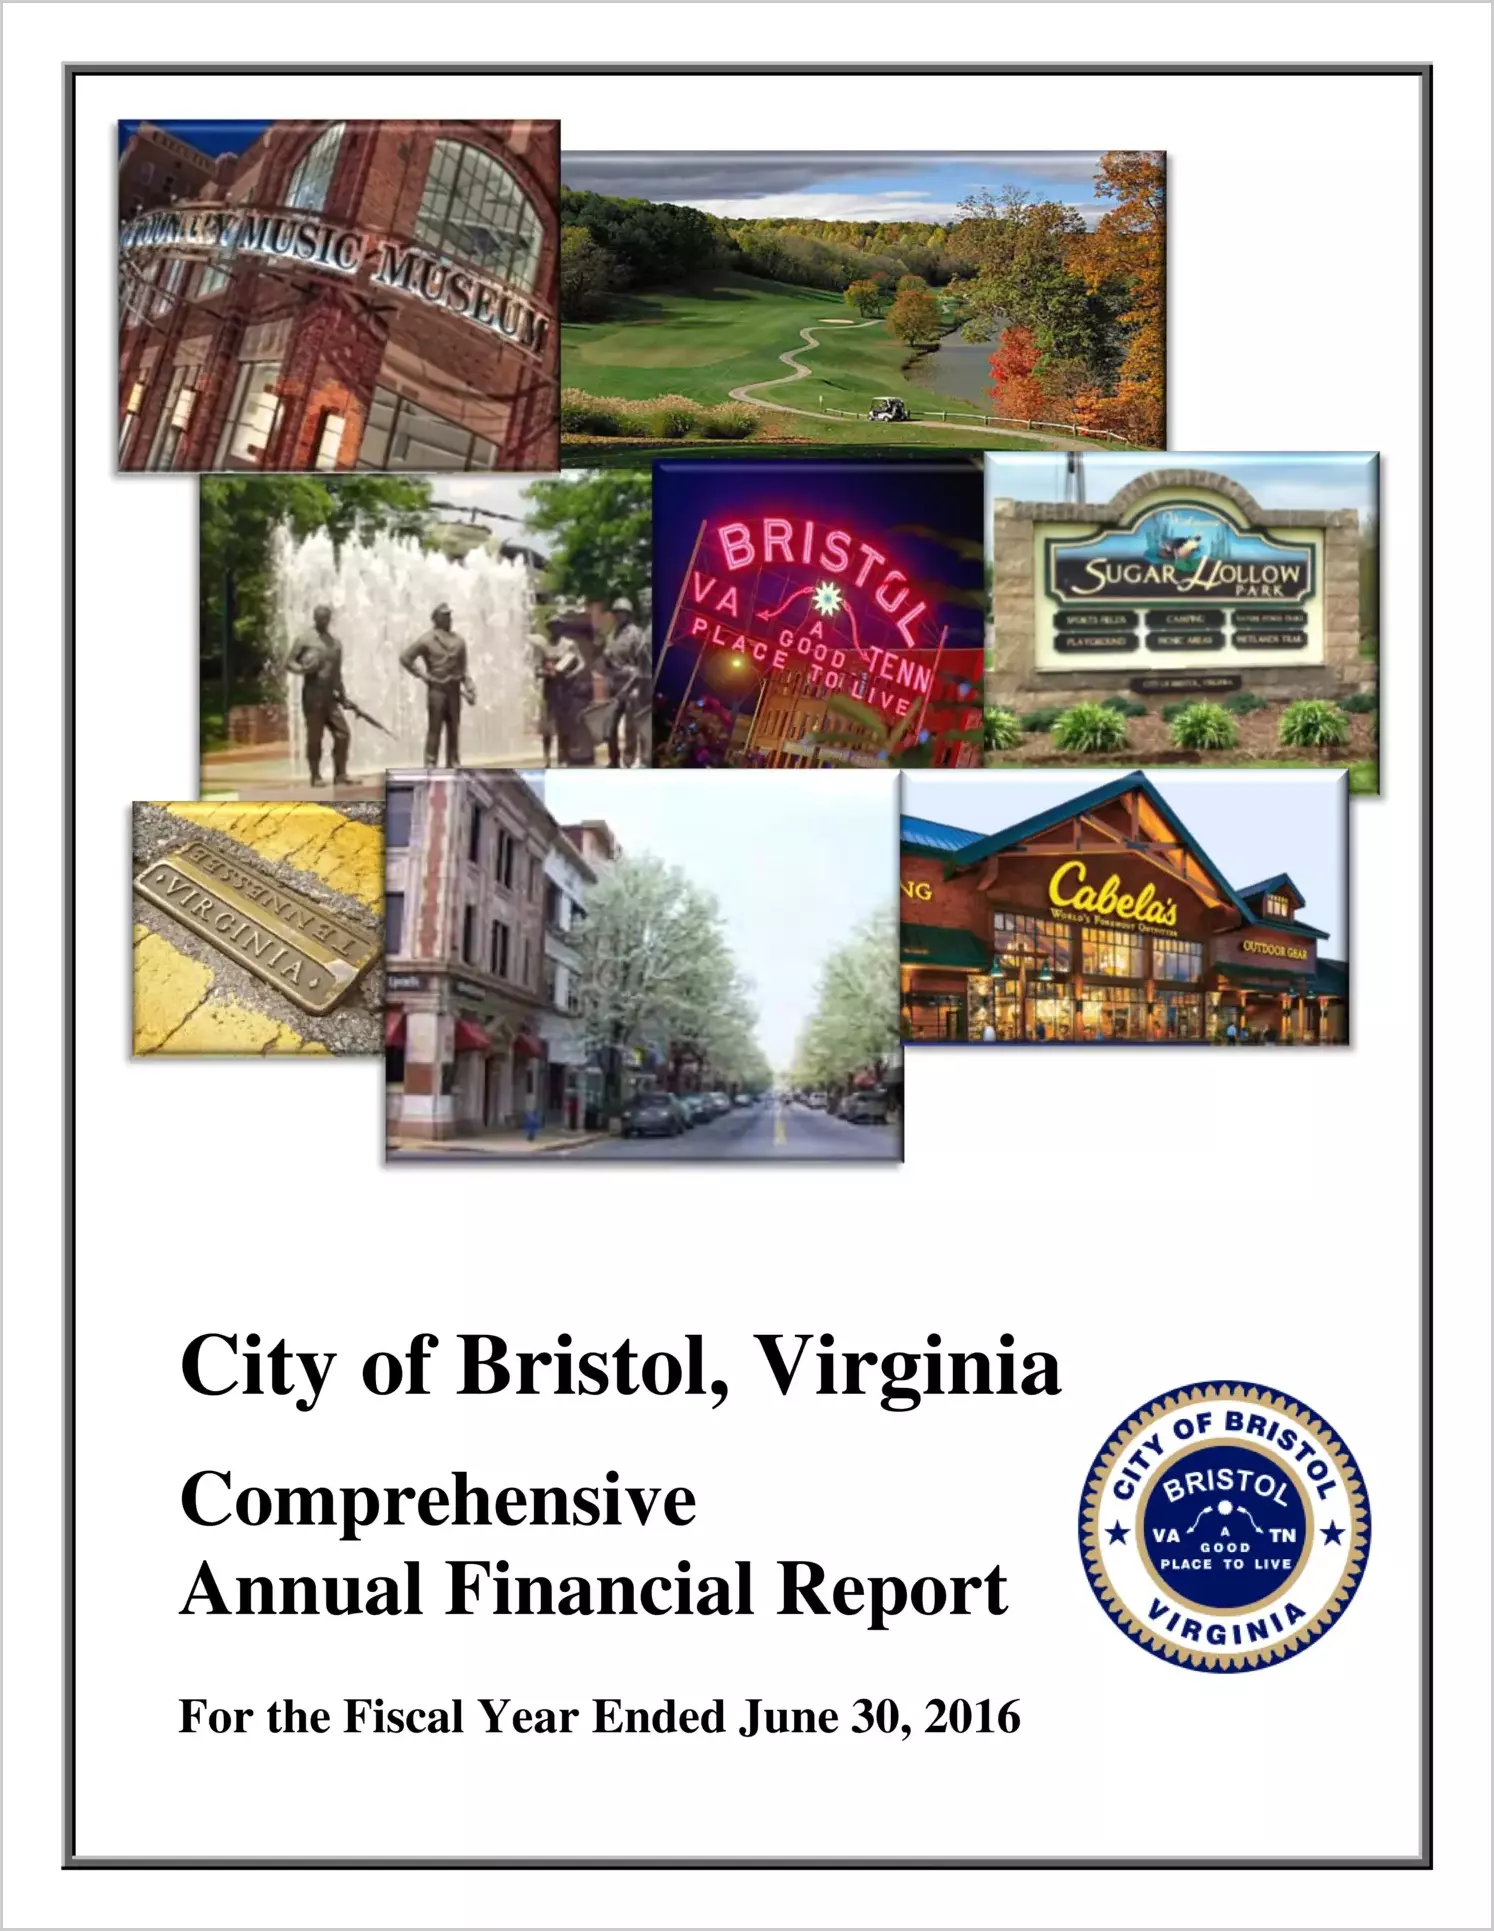 2016 Annual Financial Report for City of Bristol